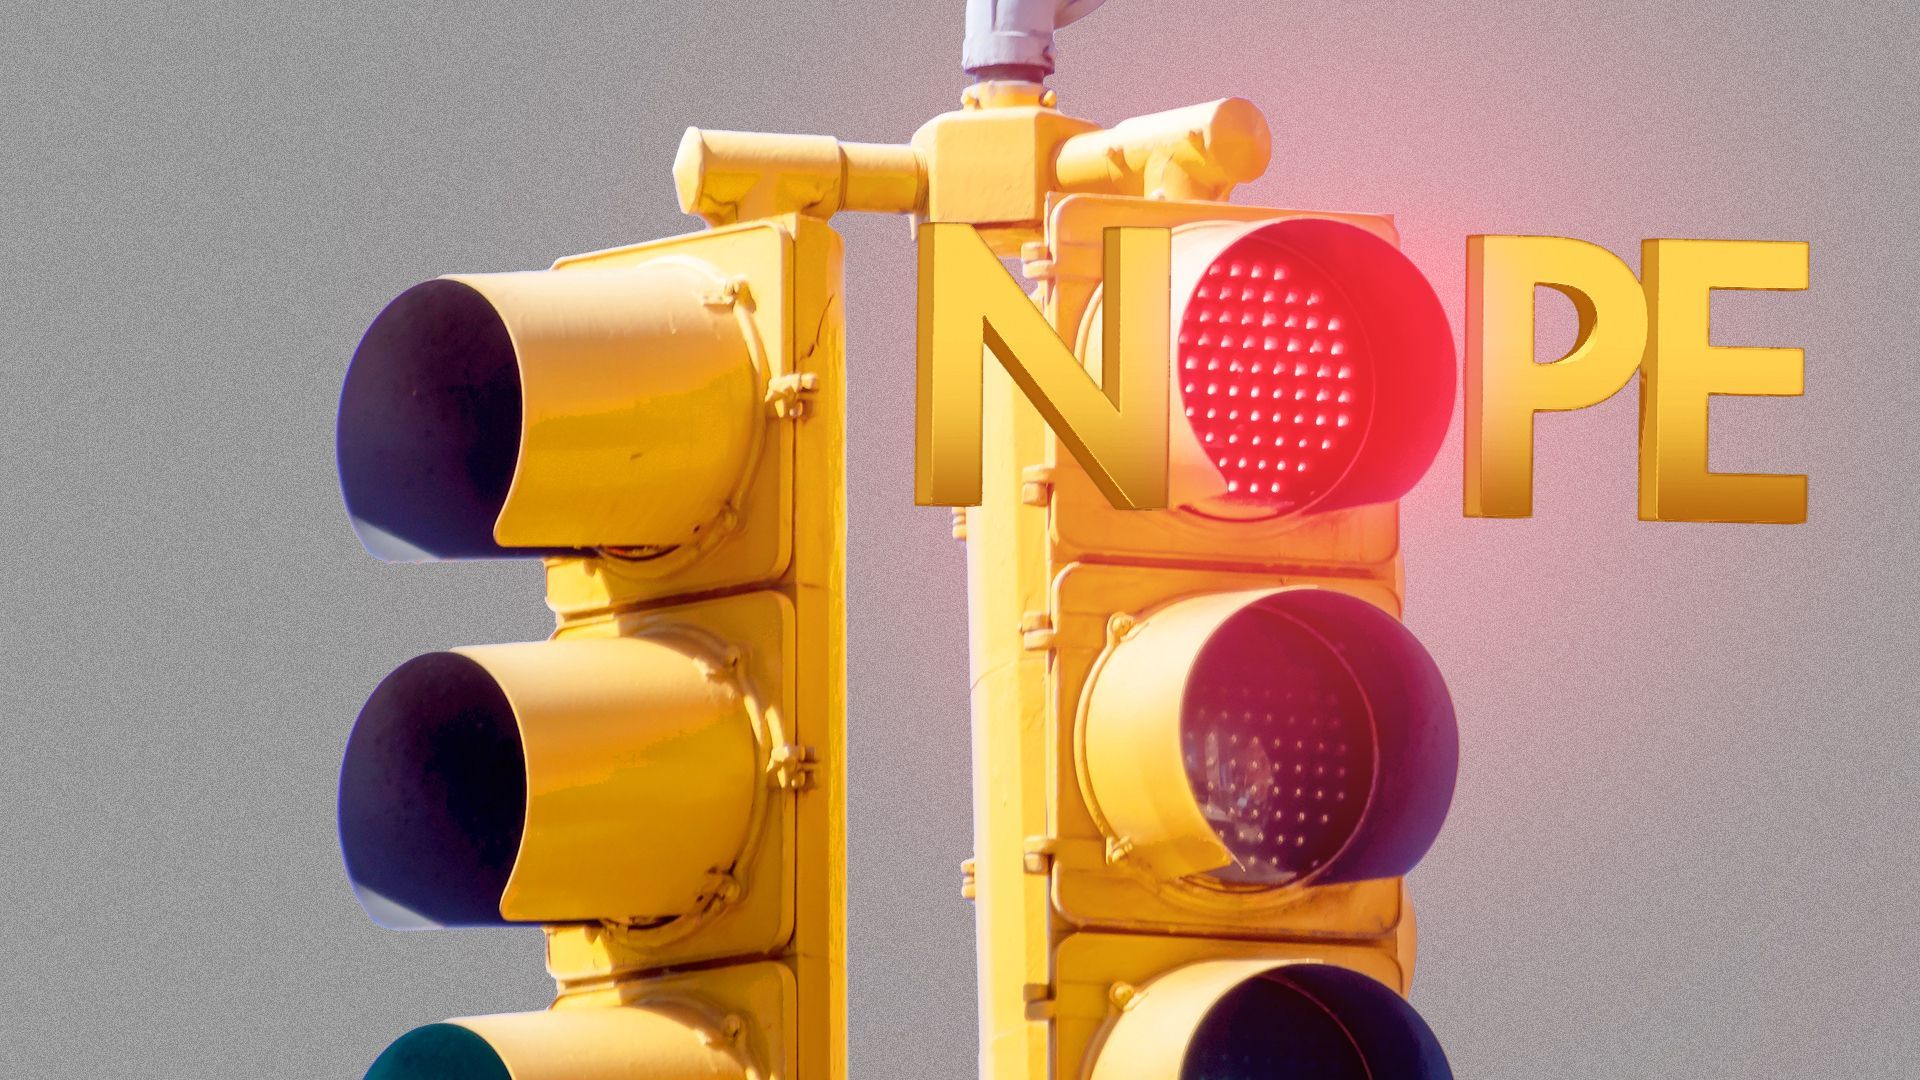 Illustration of a traffic light with the red light lit up and surrounded by letters spelling out NOPE.